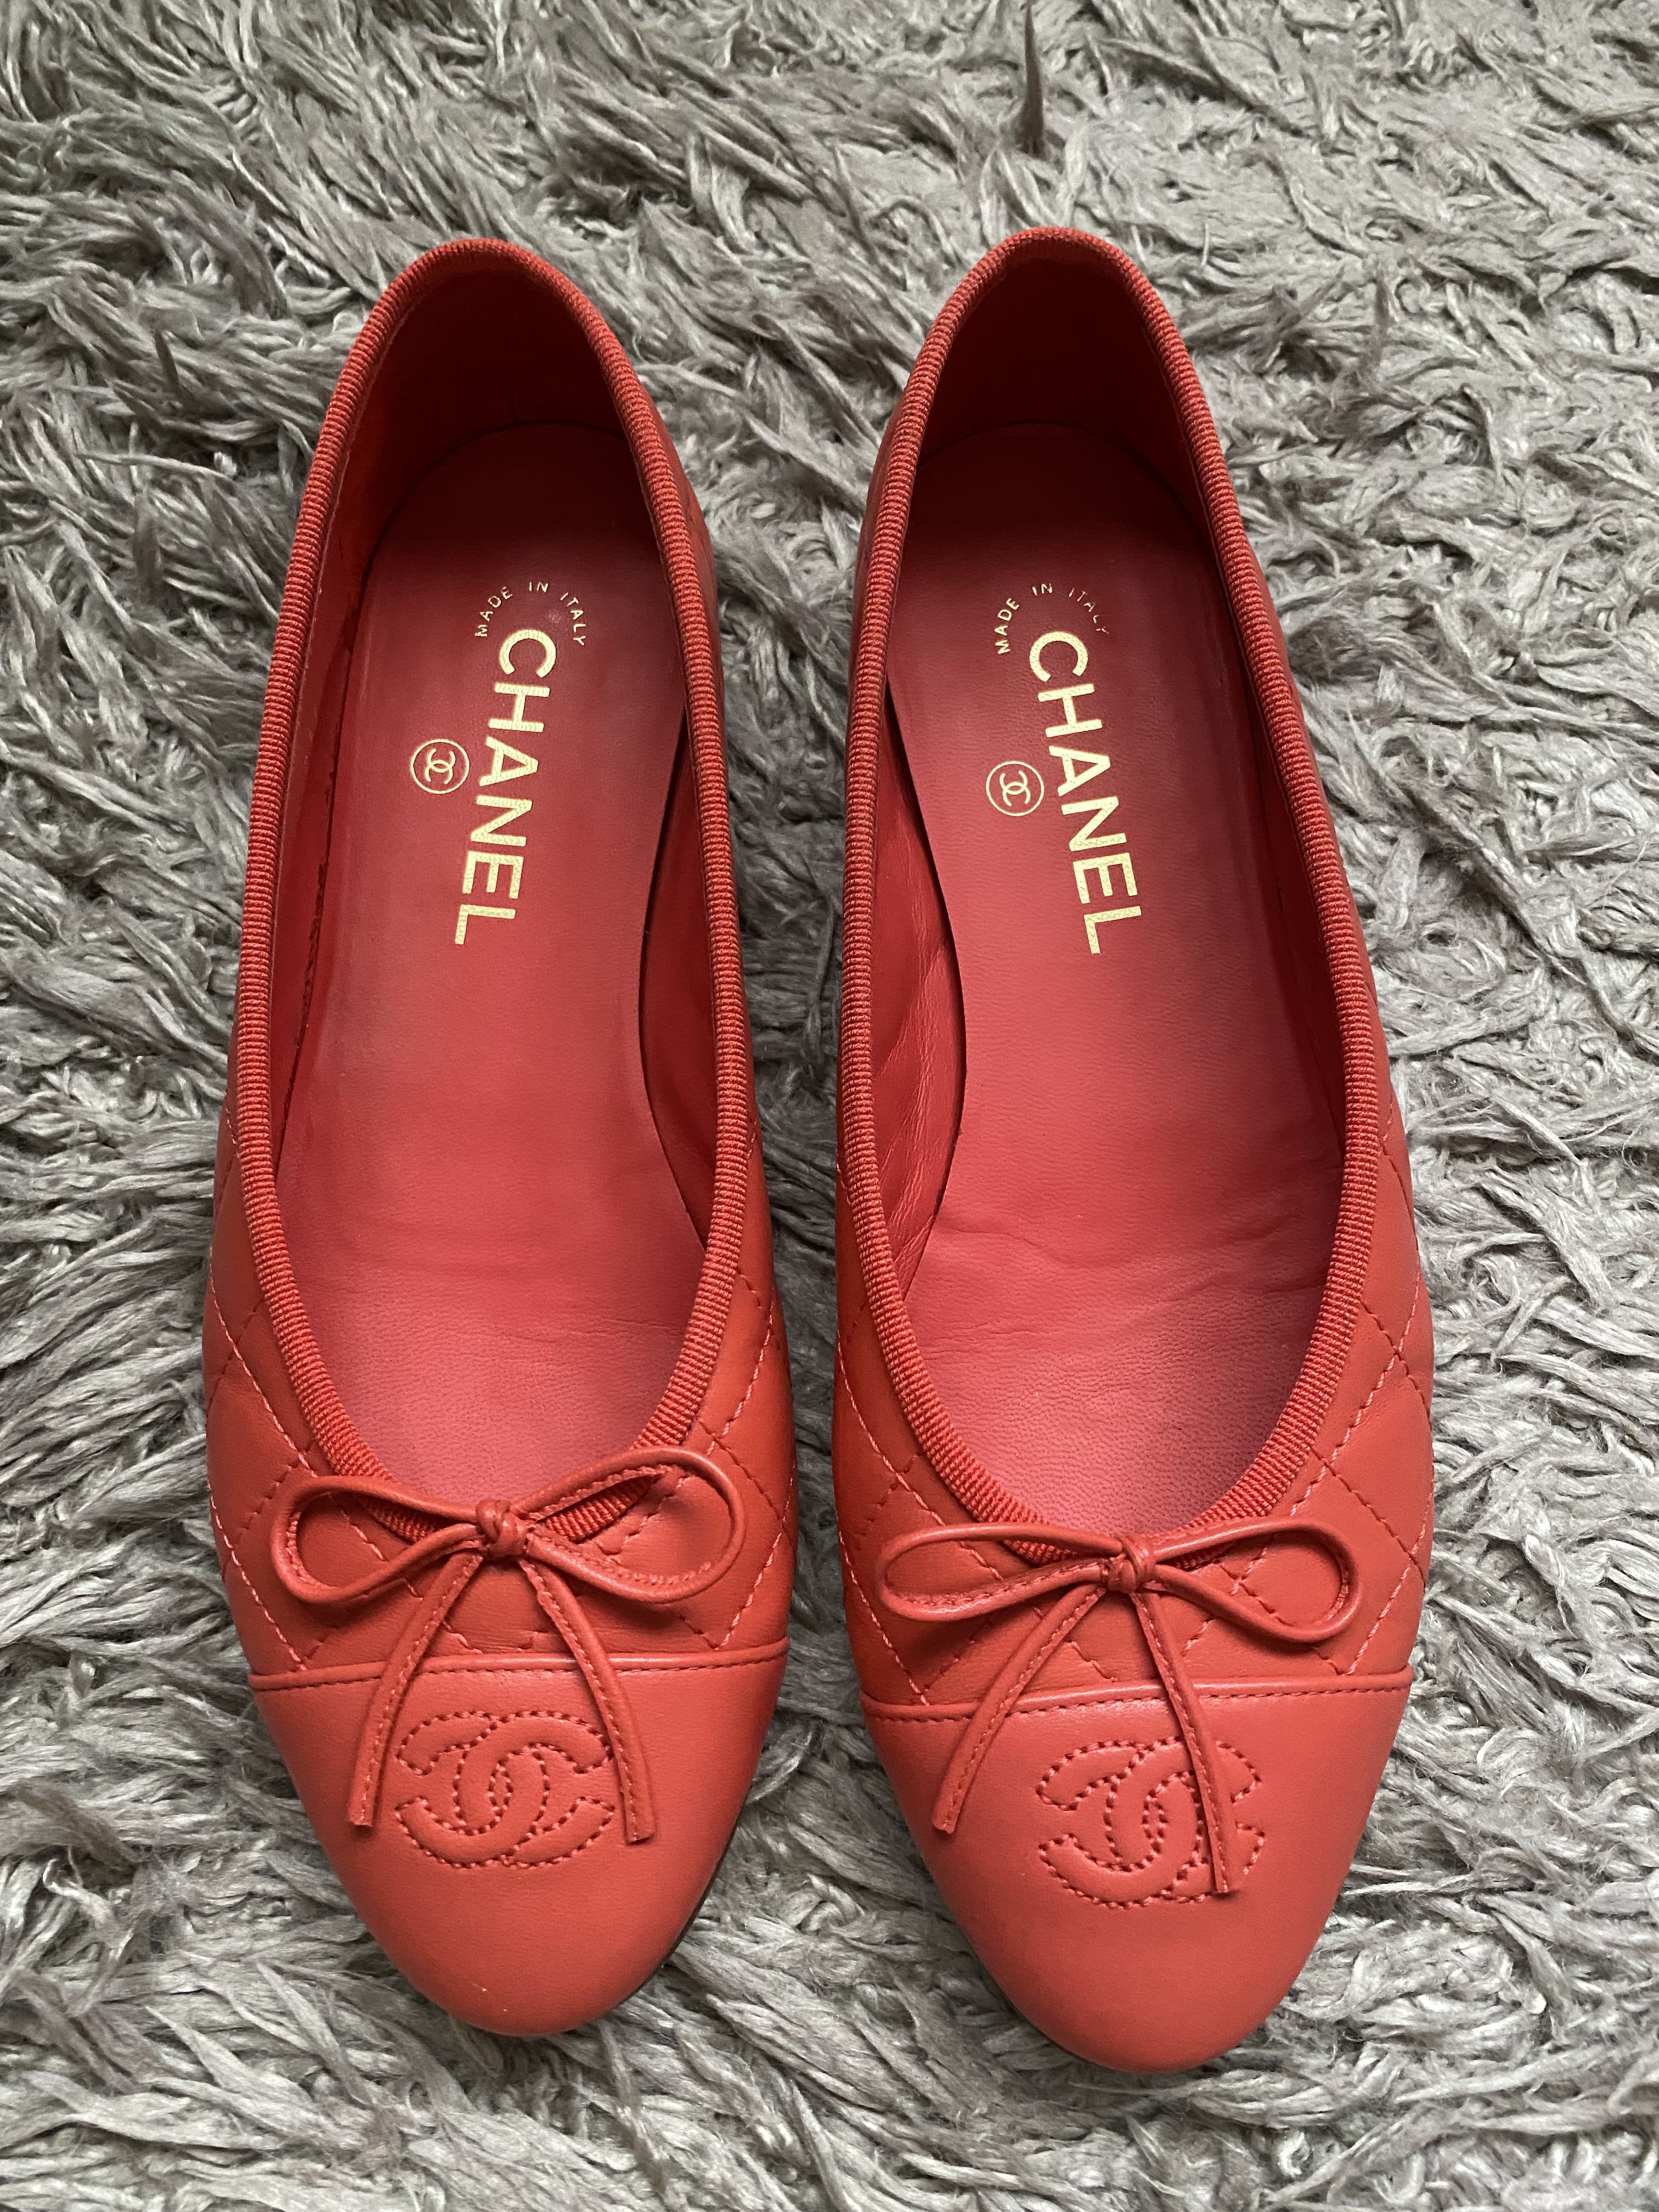 Chanel red leather quilted ballerina flats sz38.5, Women's Fashion